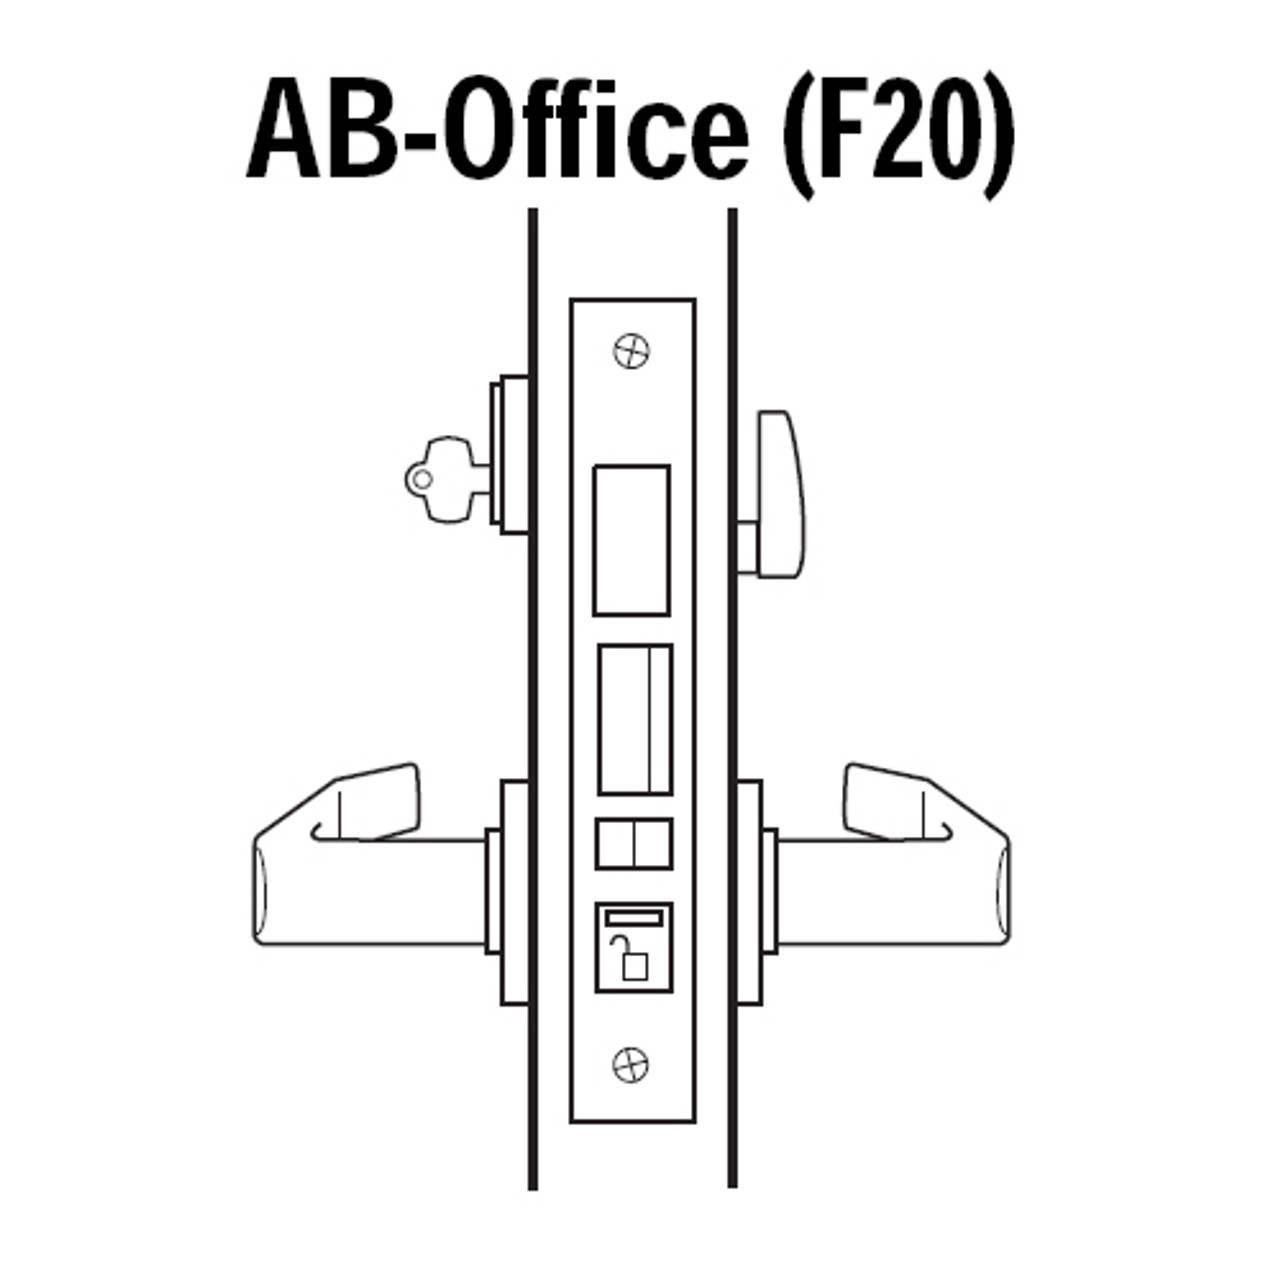 45H7AB15R619VIN Best 45H Series Office with Deadbolt Heavy Duty Mortise Lever Lock with Contour with Angle Return Style and Visual Keyed Indicator in Satin Nickel